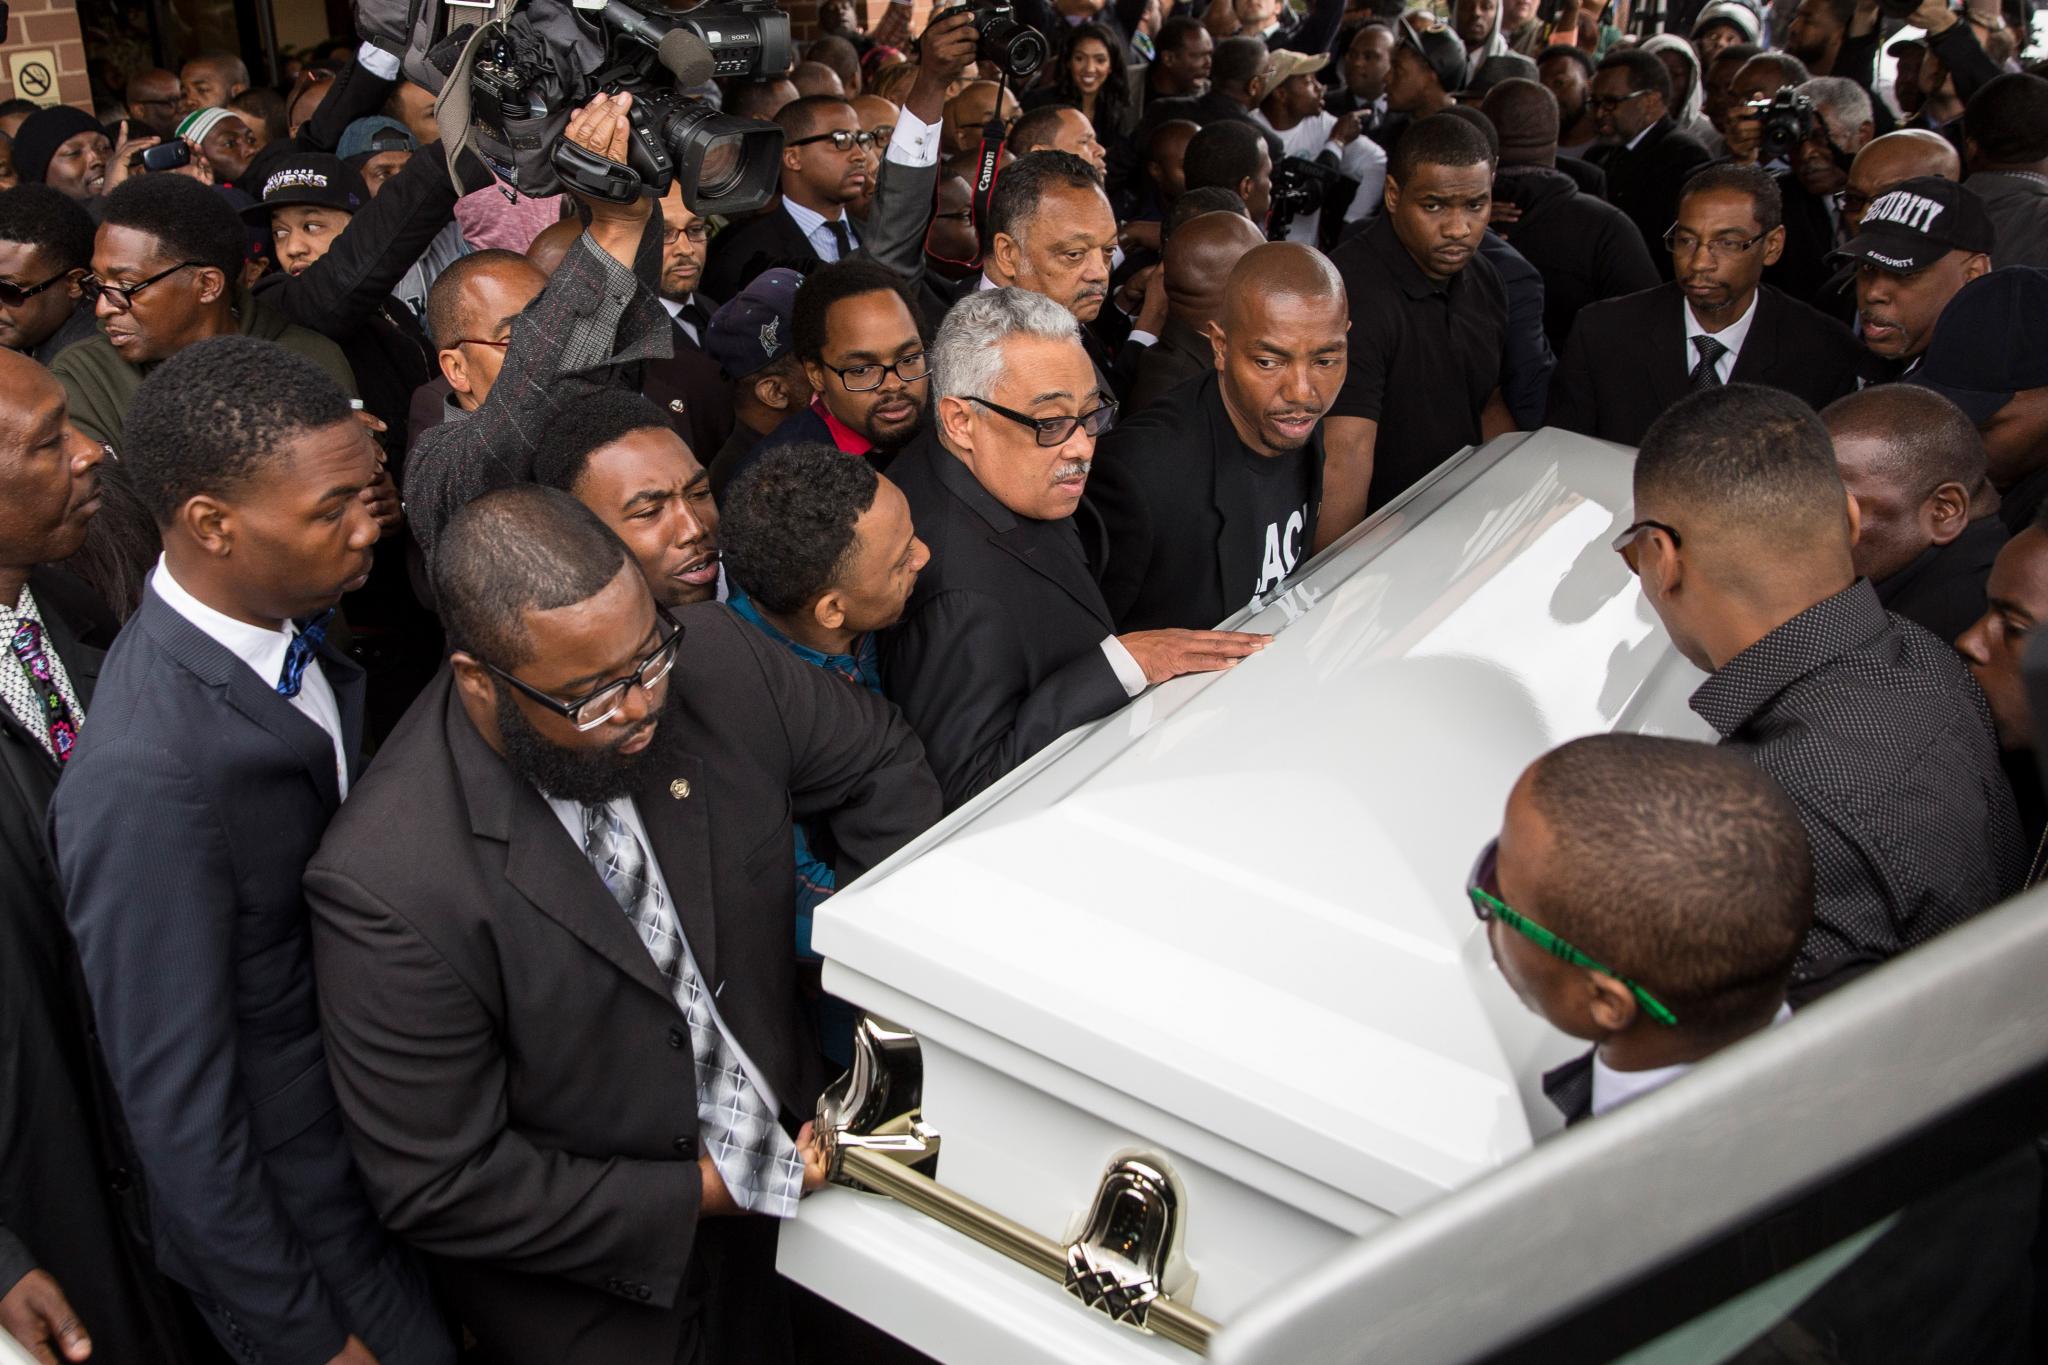 Thousands of Mourners Gather at Freddie Gray’s Funeral